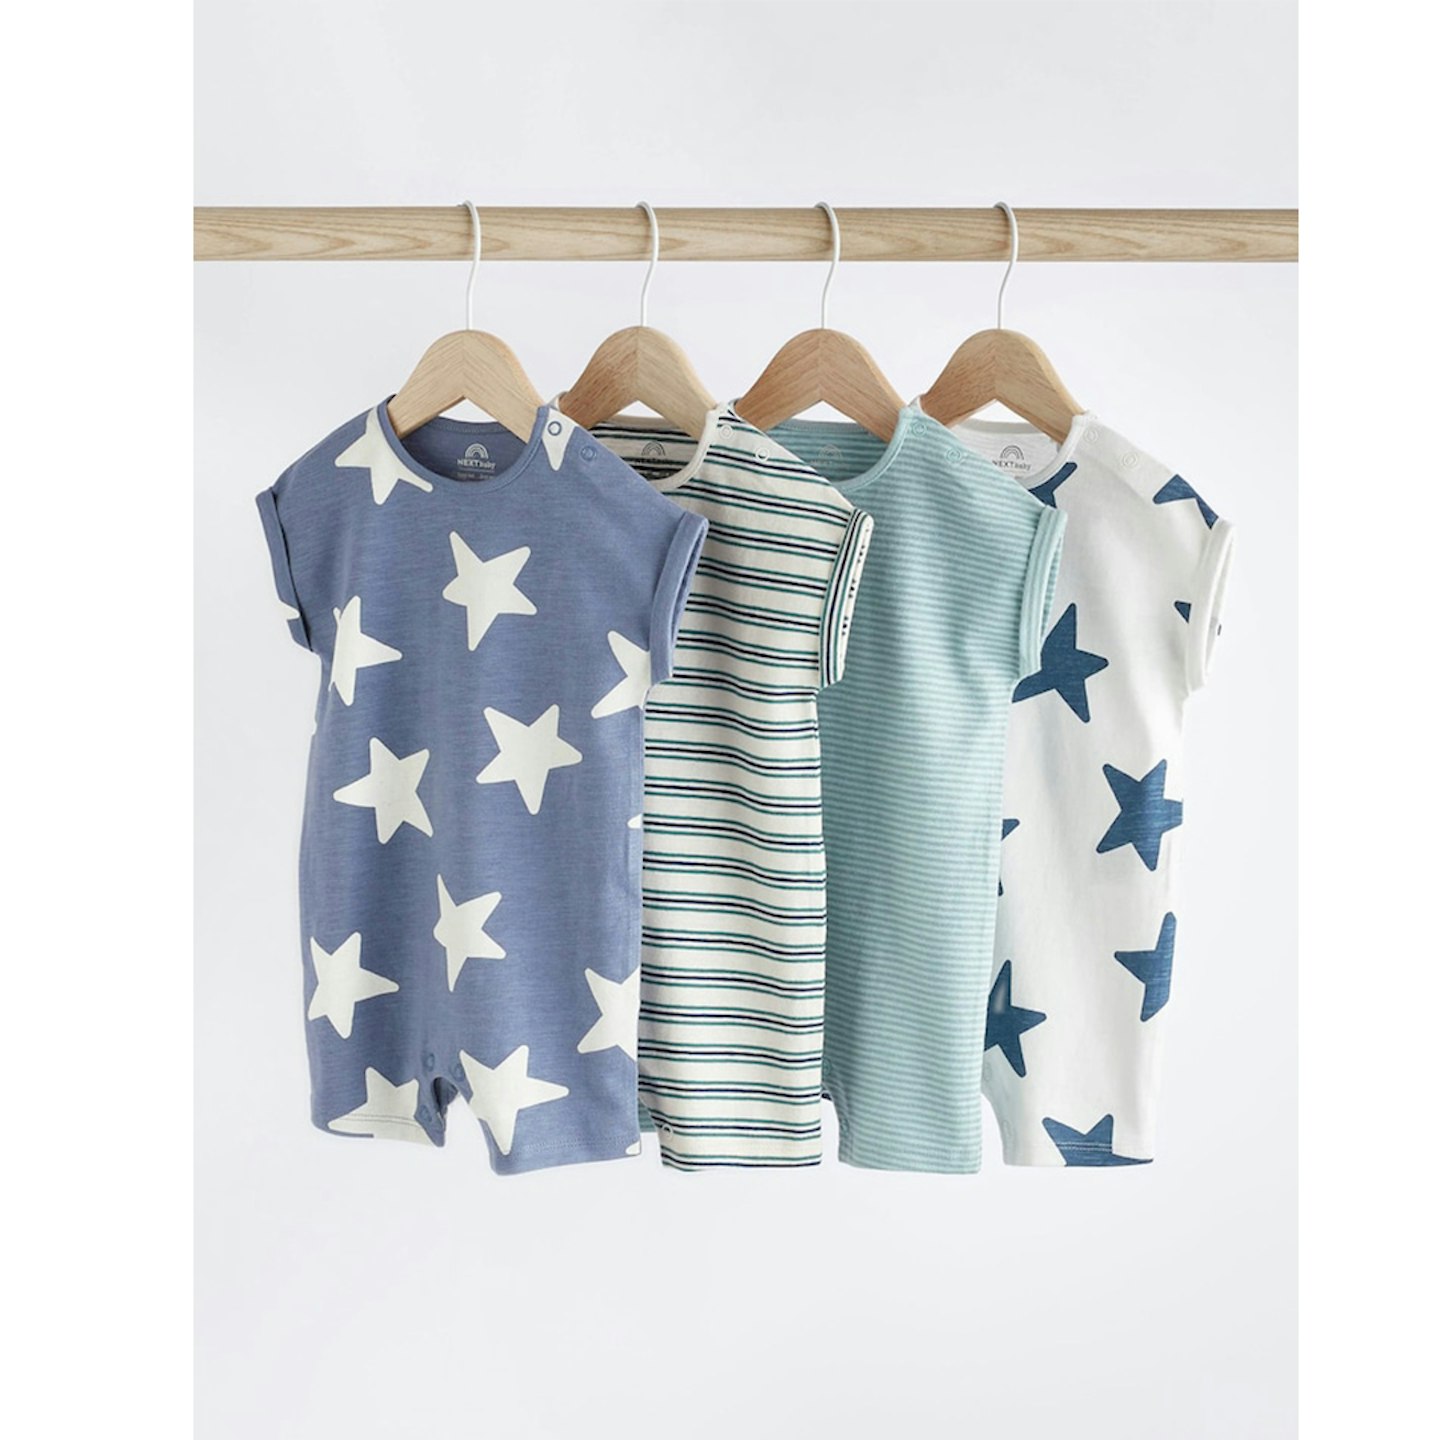 Teal Blue Star Jersey Baby Rompers